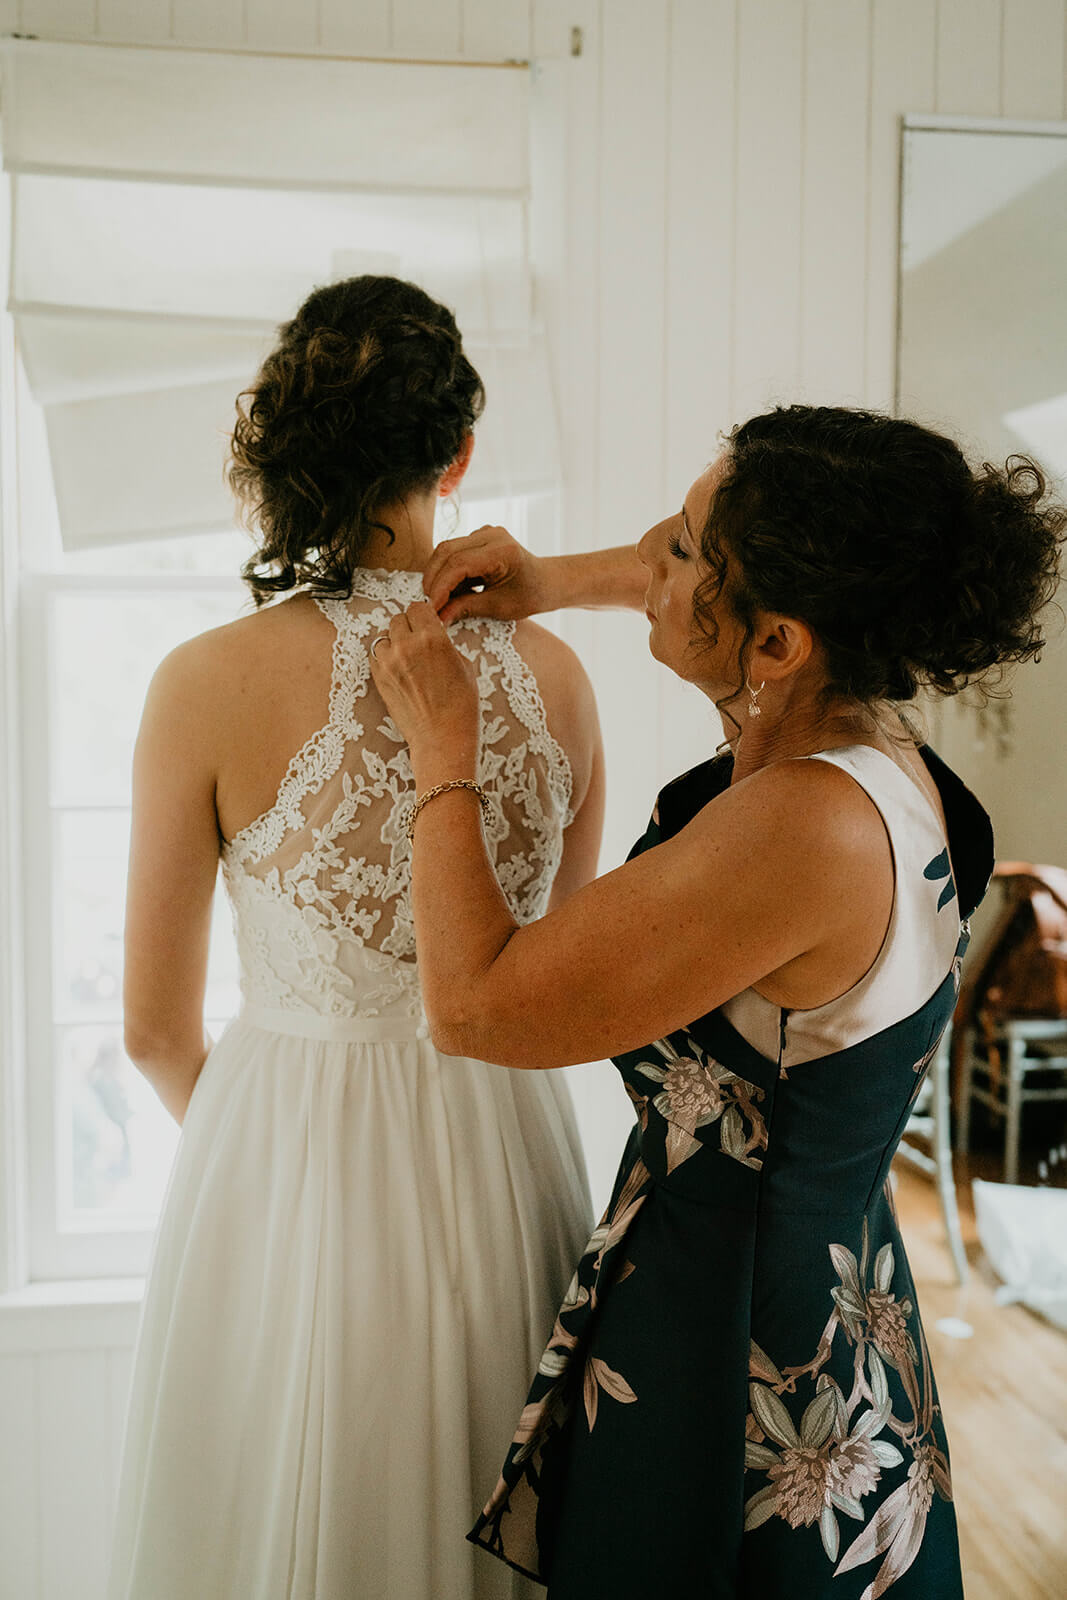 Mother of the bride helping bride into wedding dress